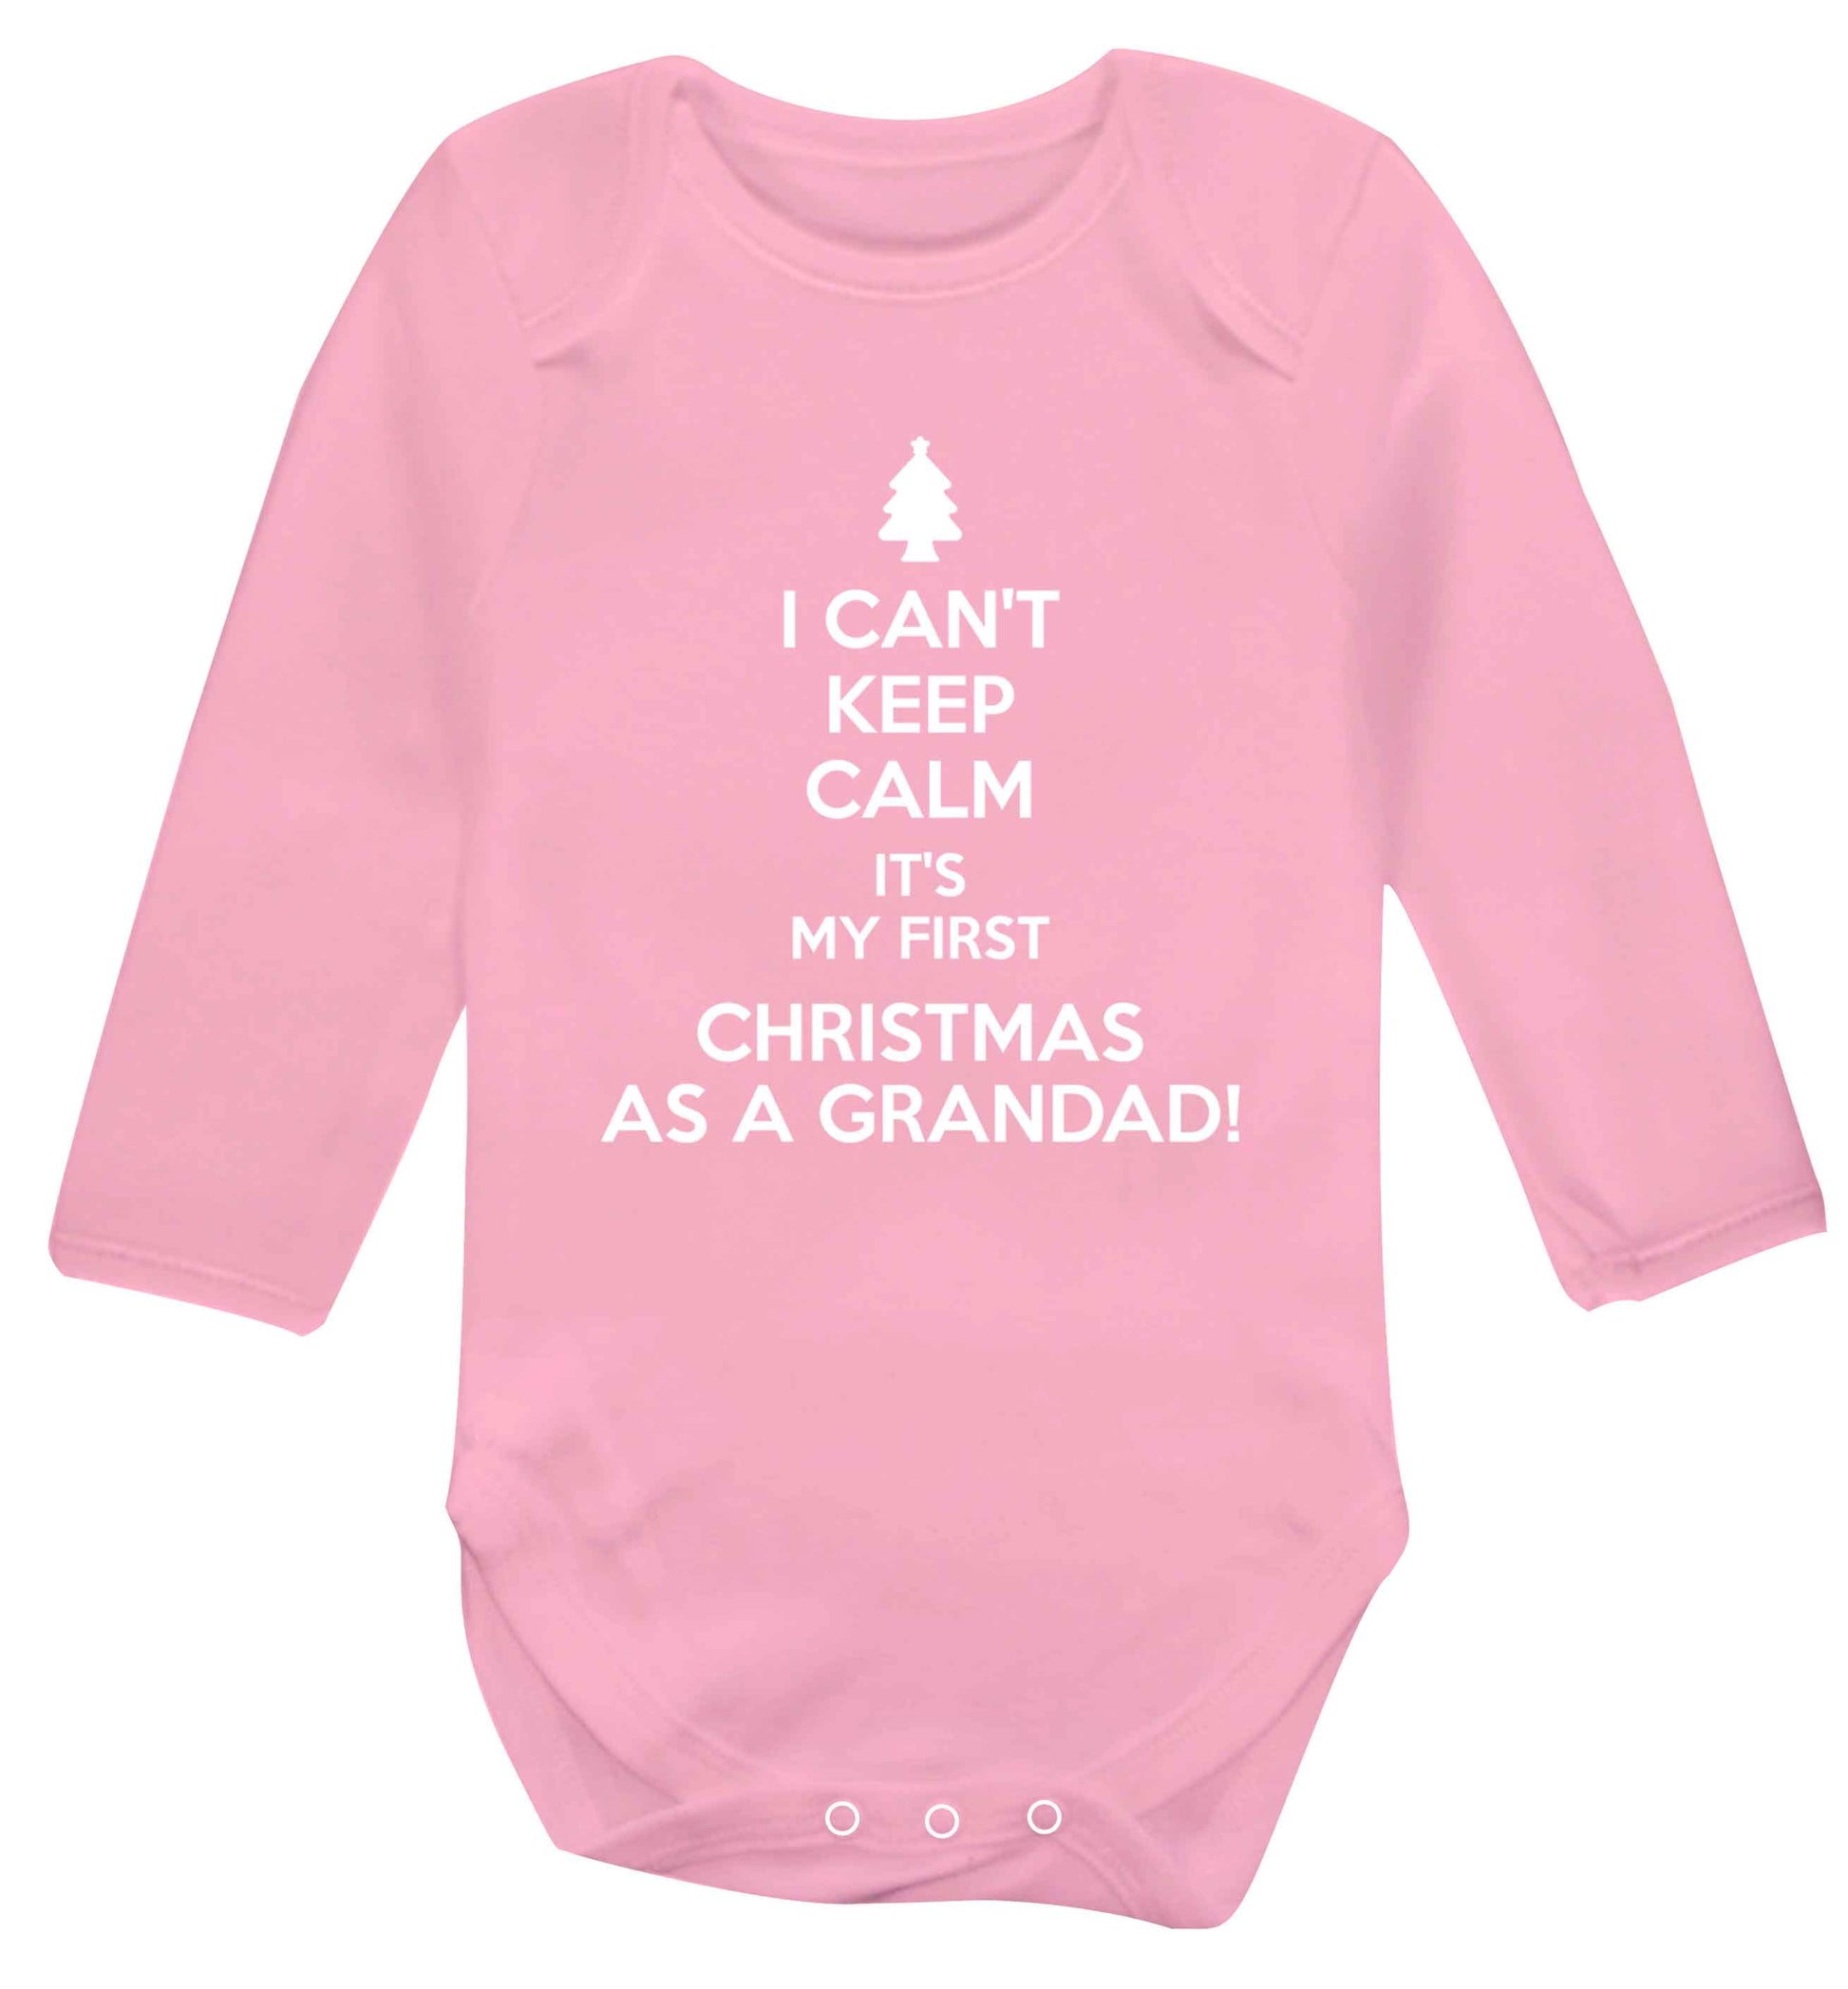 I can't keep calm it's my first Christmas as a grandad! Baby Vest long sleeved pale pink 6-12 months